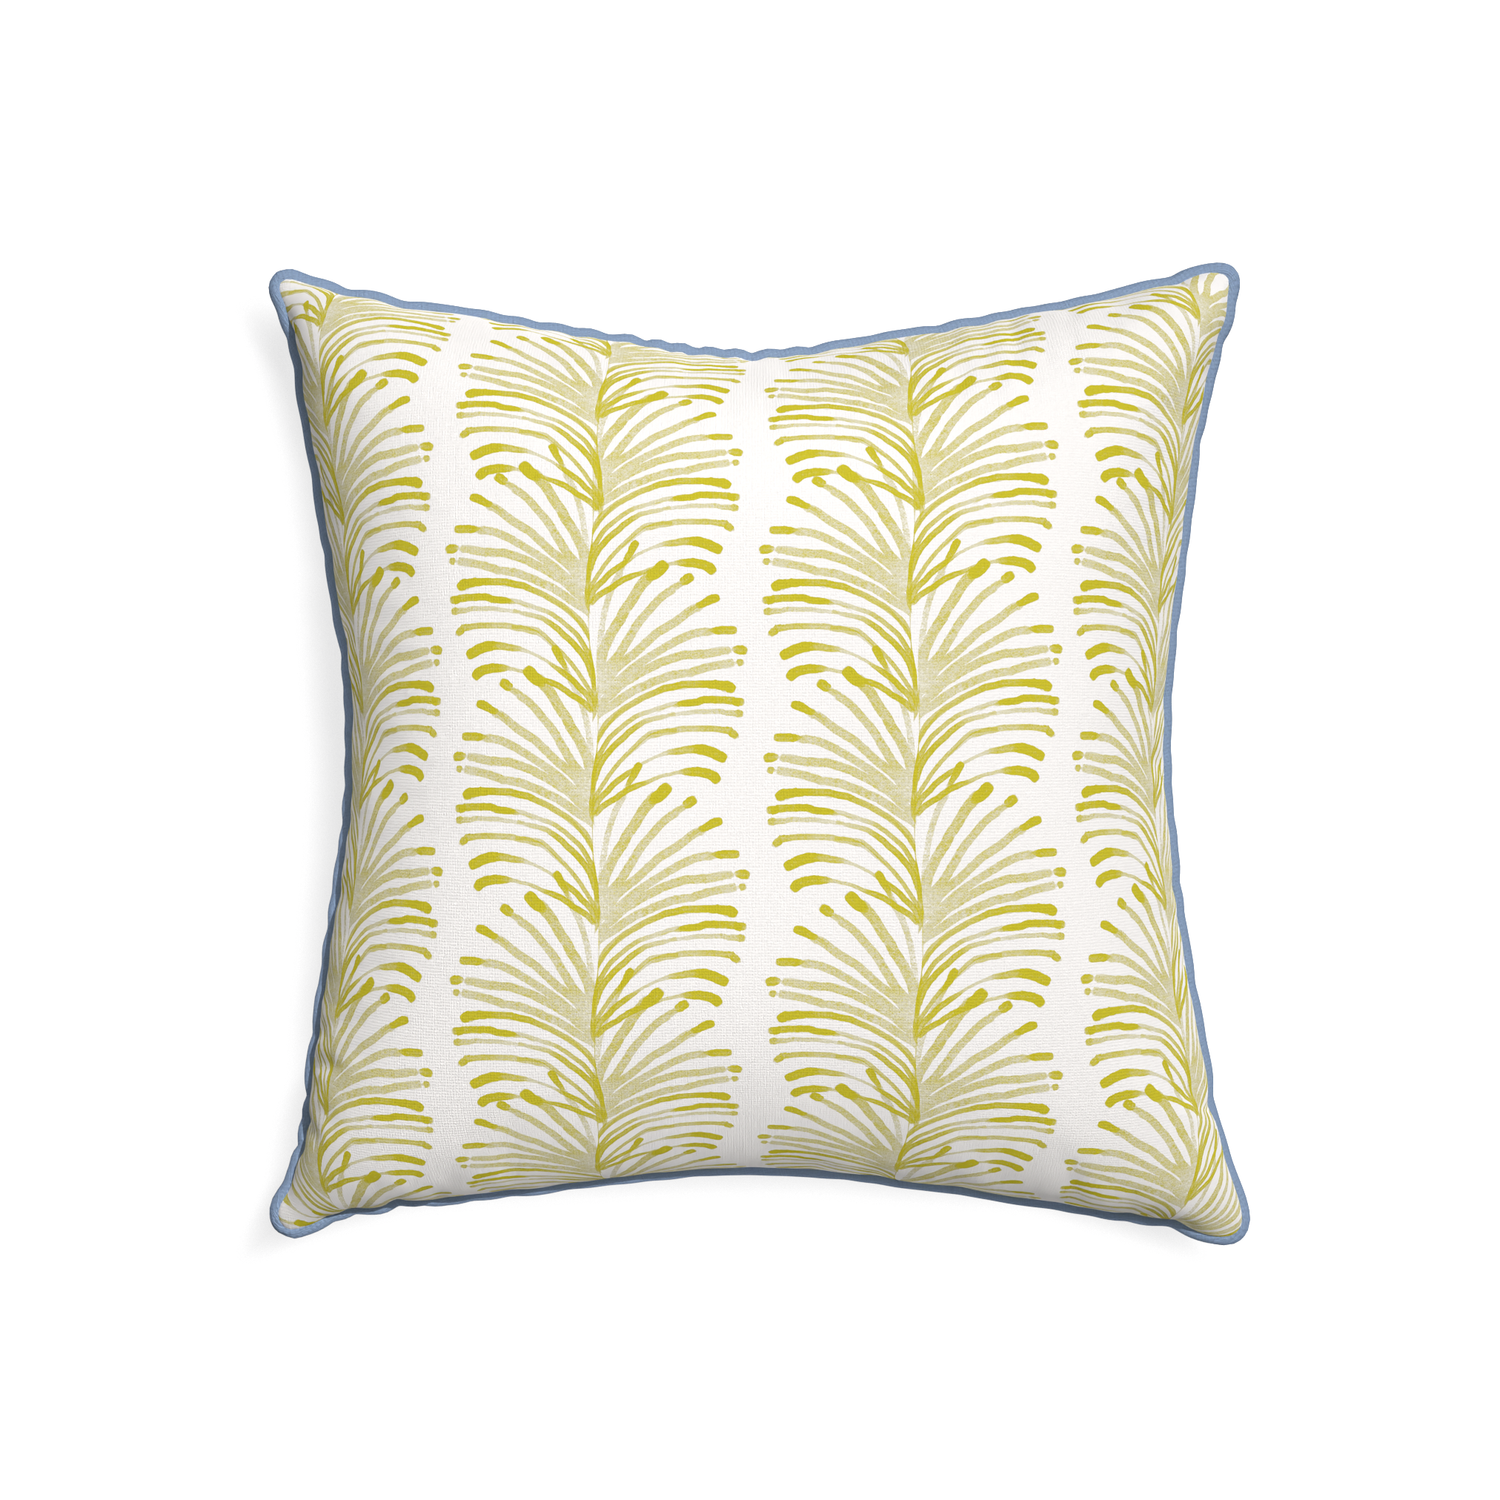 22-square emma chartreuse custom pillow with sky piping on white background